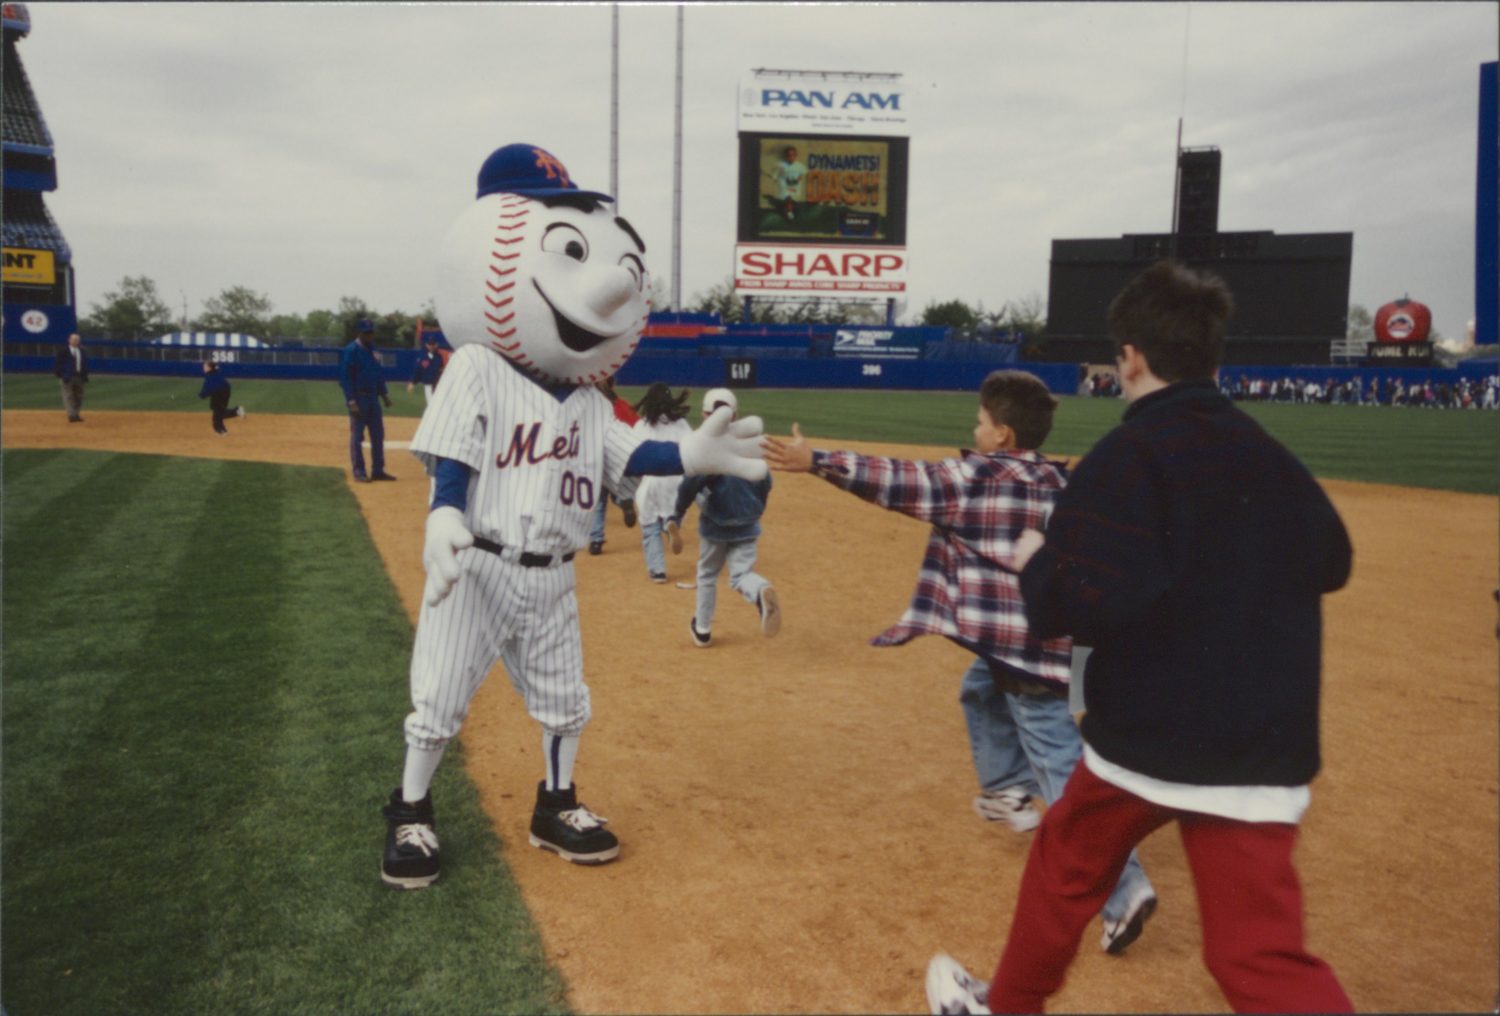 Mr. Met Motivates Young Fans at Shea Stadium